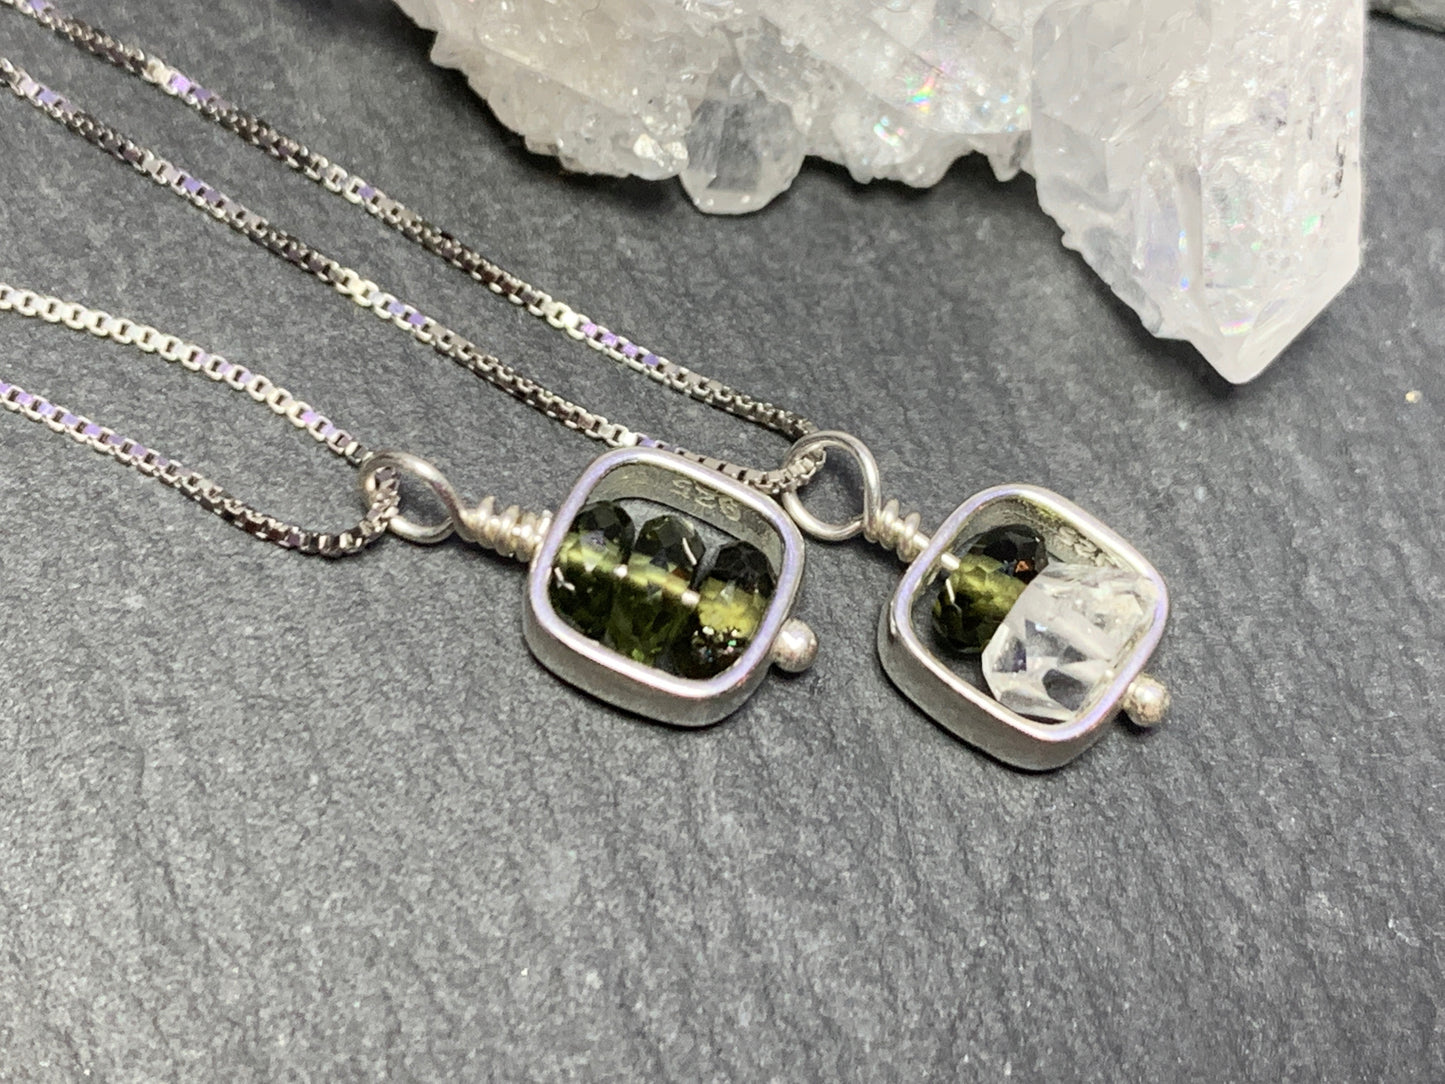 Pendant with Moldavite and Herkimer beads